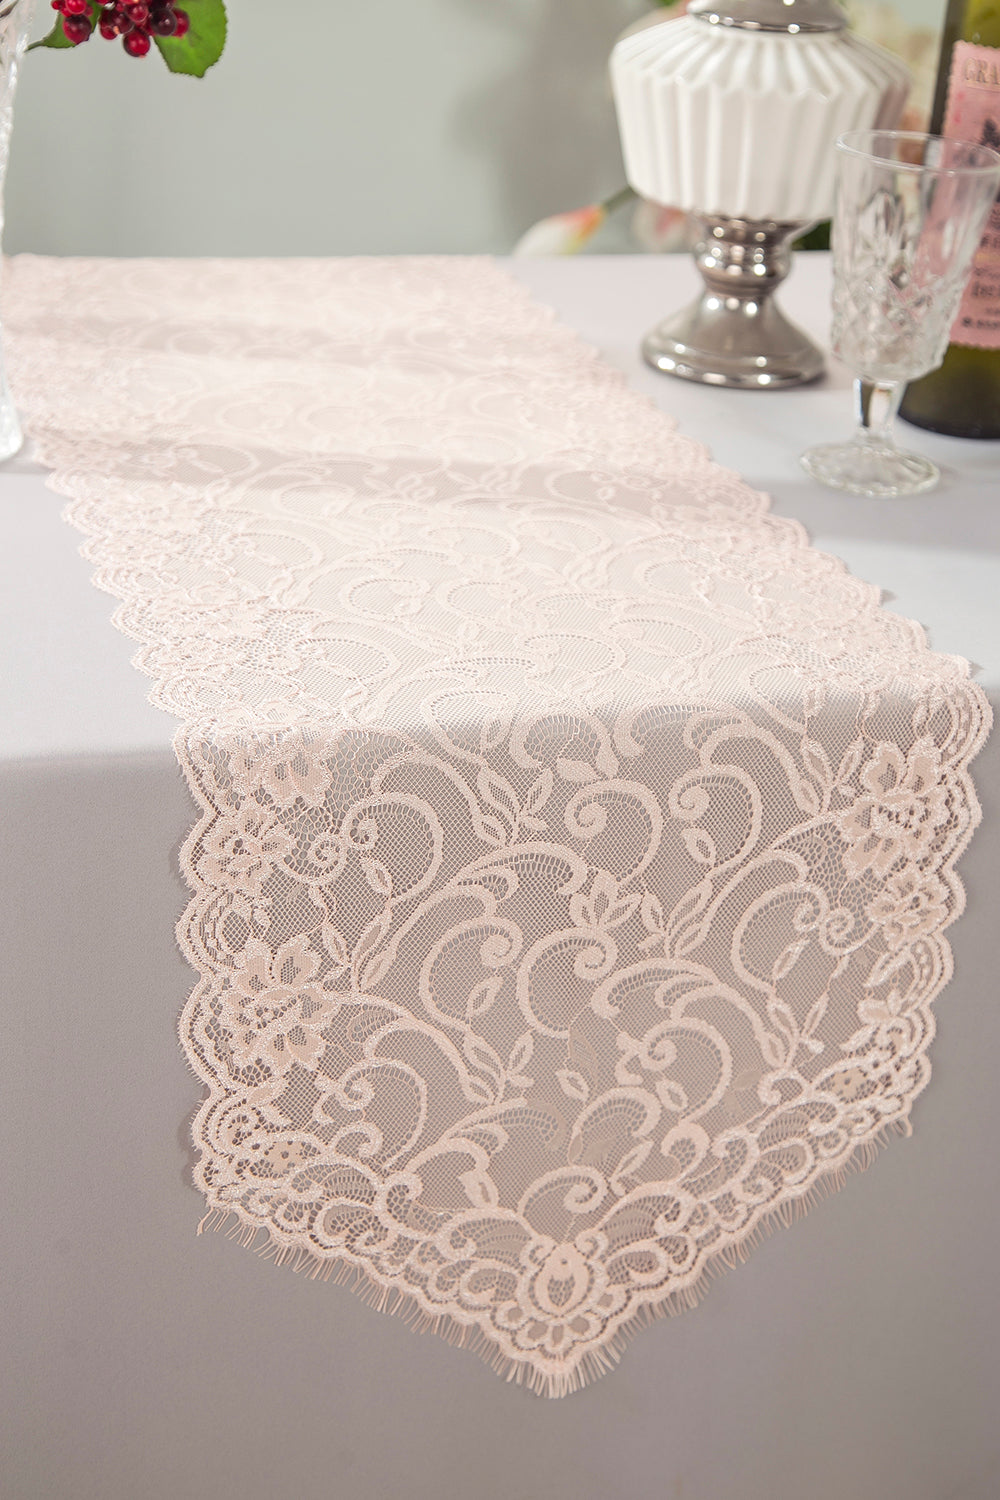 12"x108" Chantilly Lace Table Runner - Blush Pink/Rose Gold (1pc)